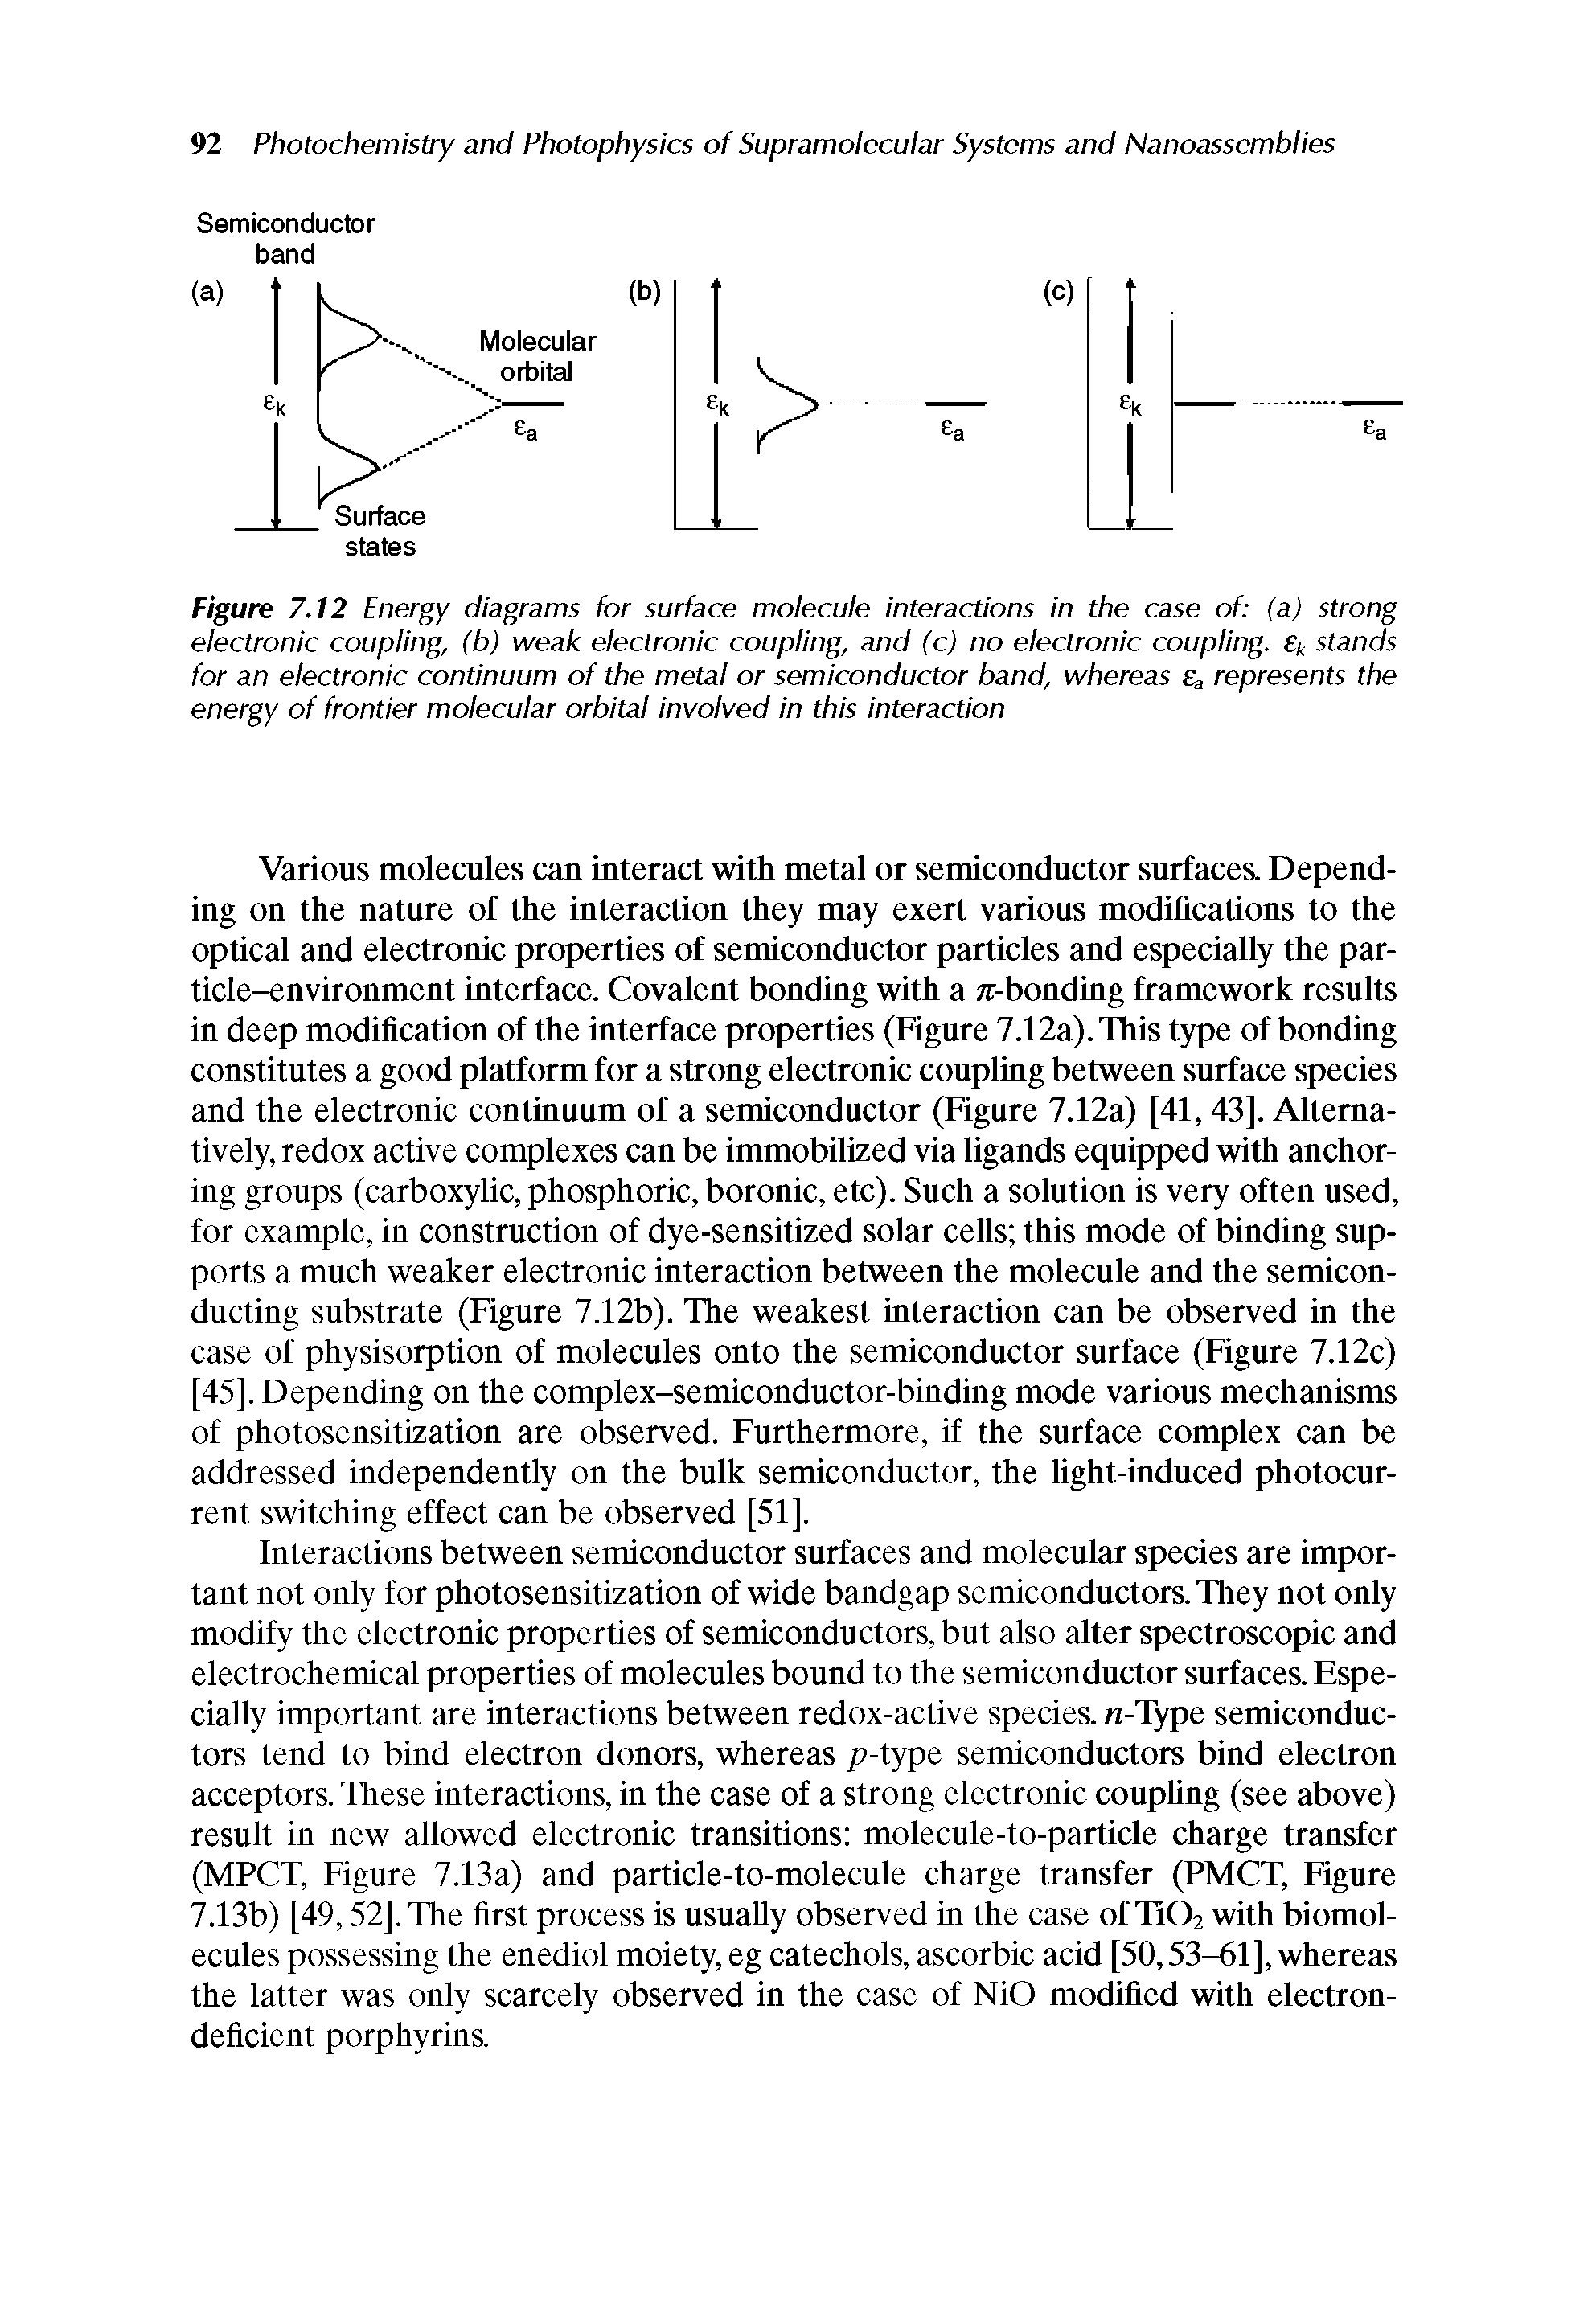 Figure 7.12 Energy diagrams for surface-molecule interactions in the case of (a) strong electronic coupling, (b) weak electronic coupling, and (c) no electronic coupling. ek stands for an electronic continuum of the metal or semiconductor band, whereas , represents the energy of frontier molecular orbital involved in this interaction...